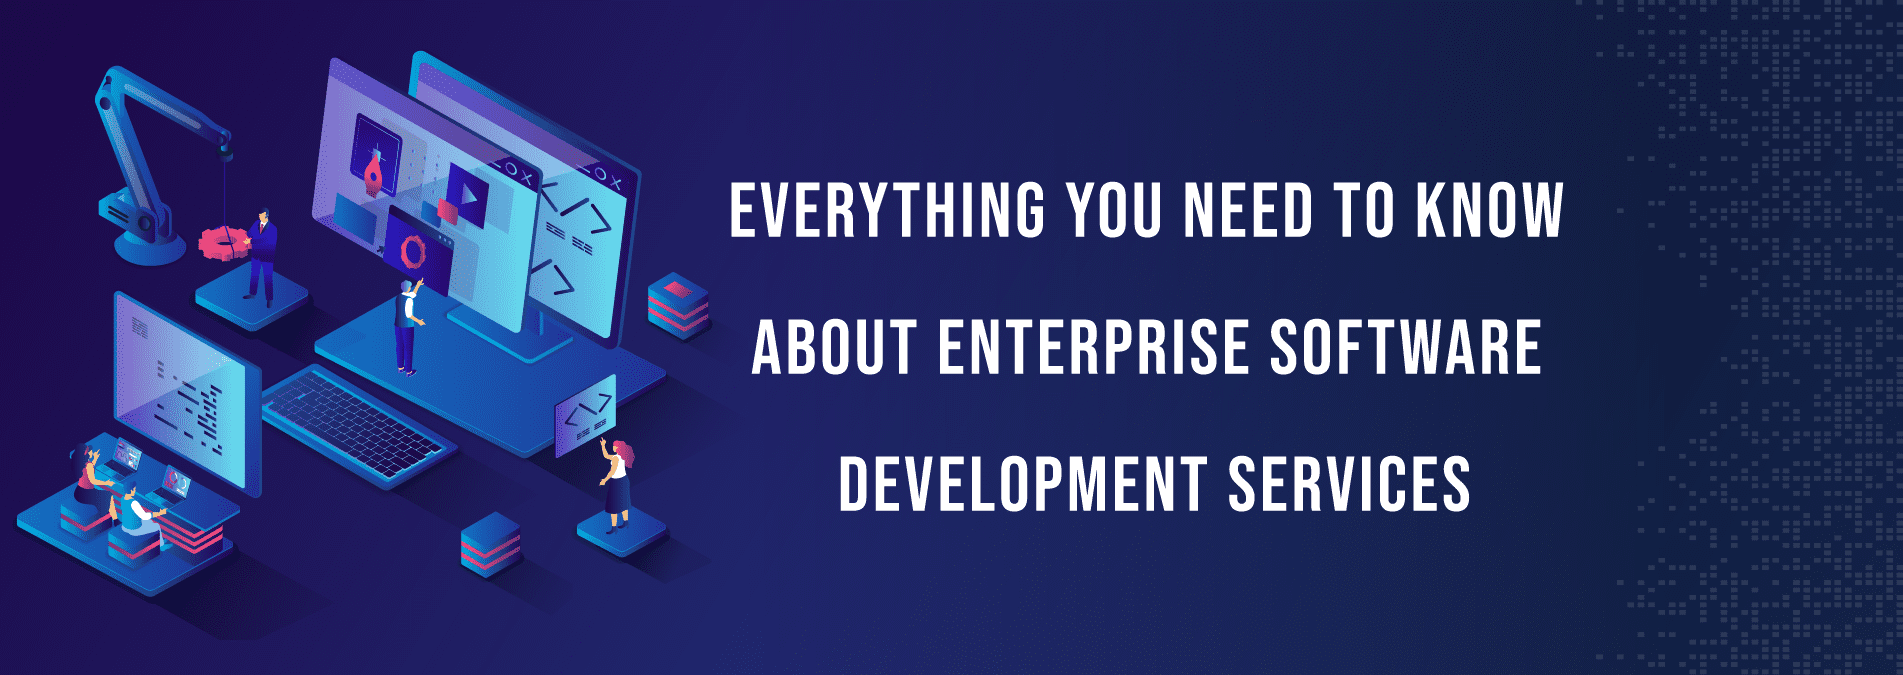 Everything to know about enterprise software development services - Internet Soft